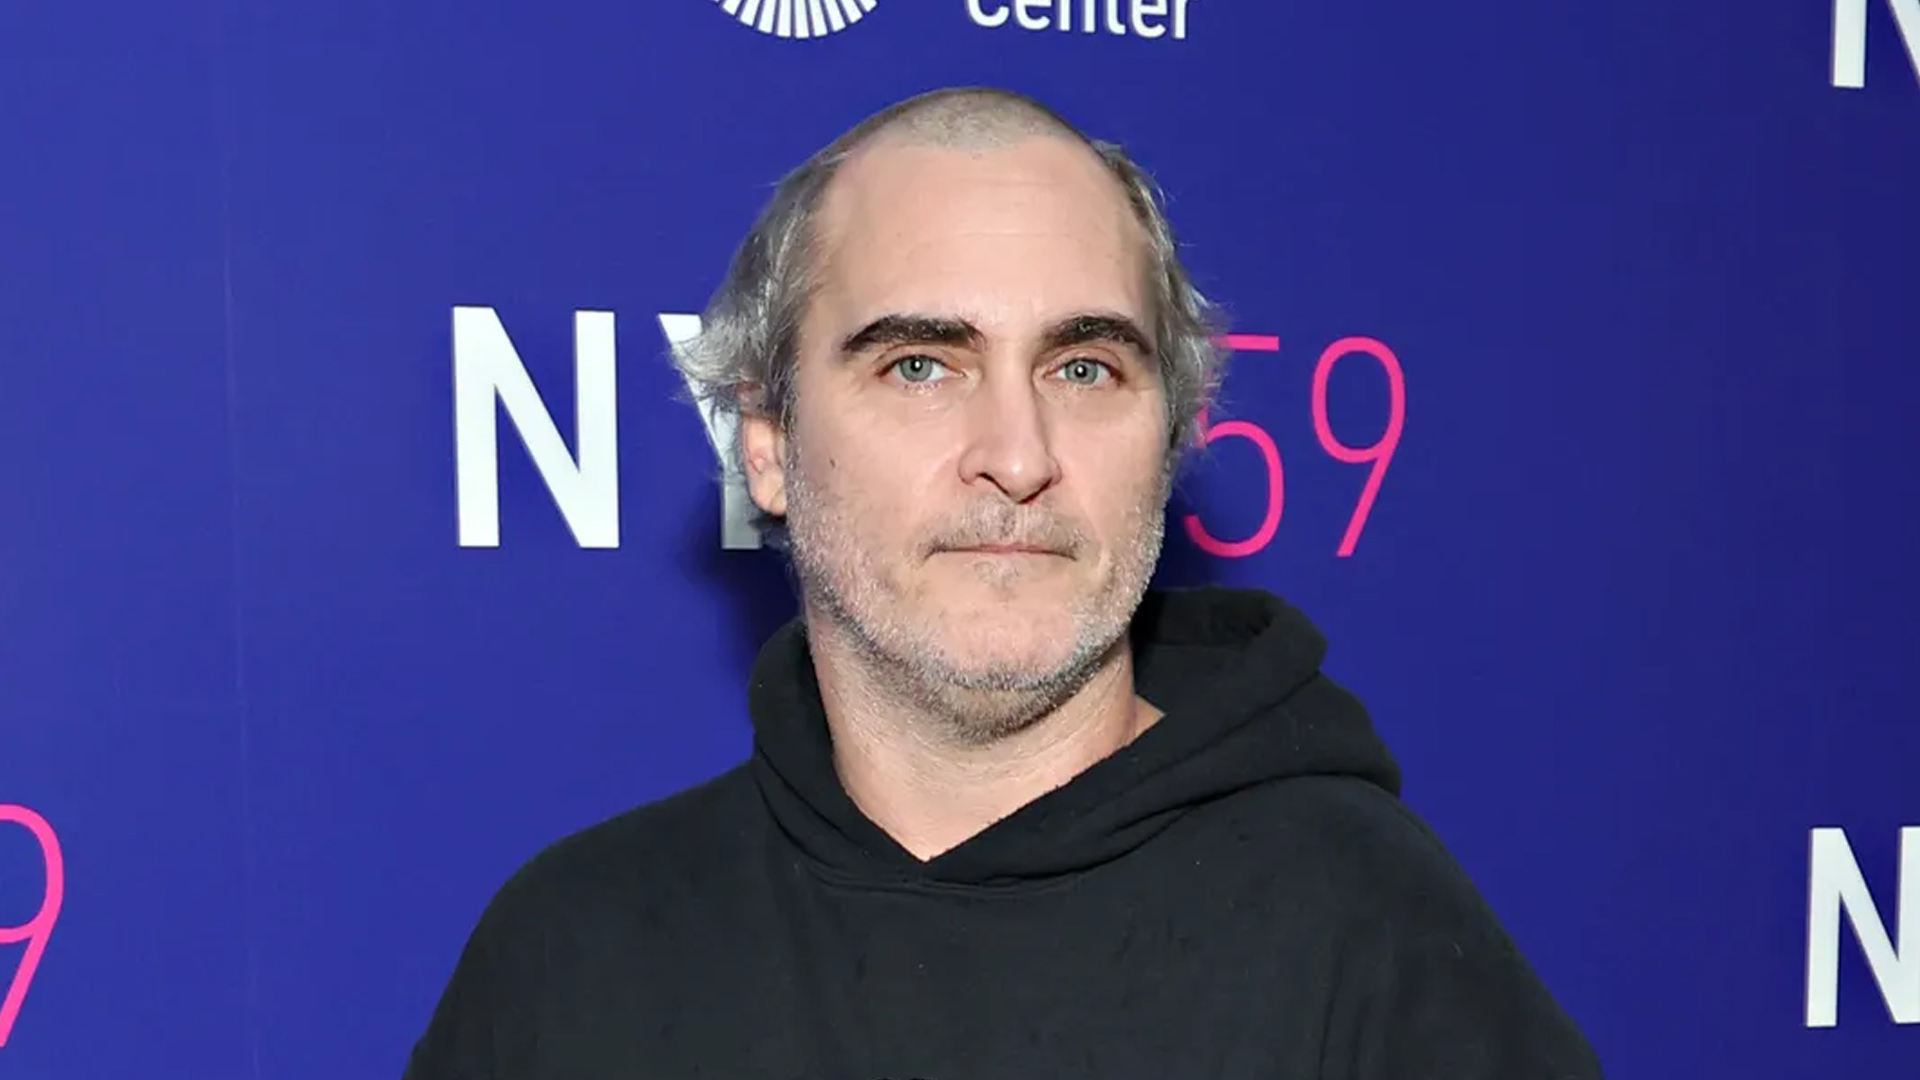 How Many Siblings Does Joaquin Phoenix Have?